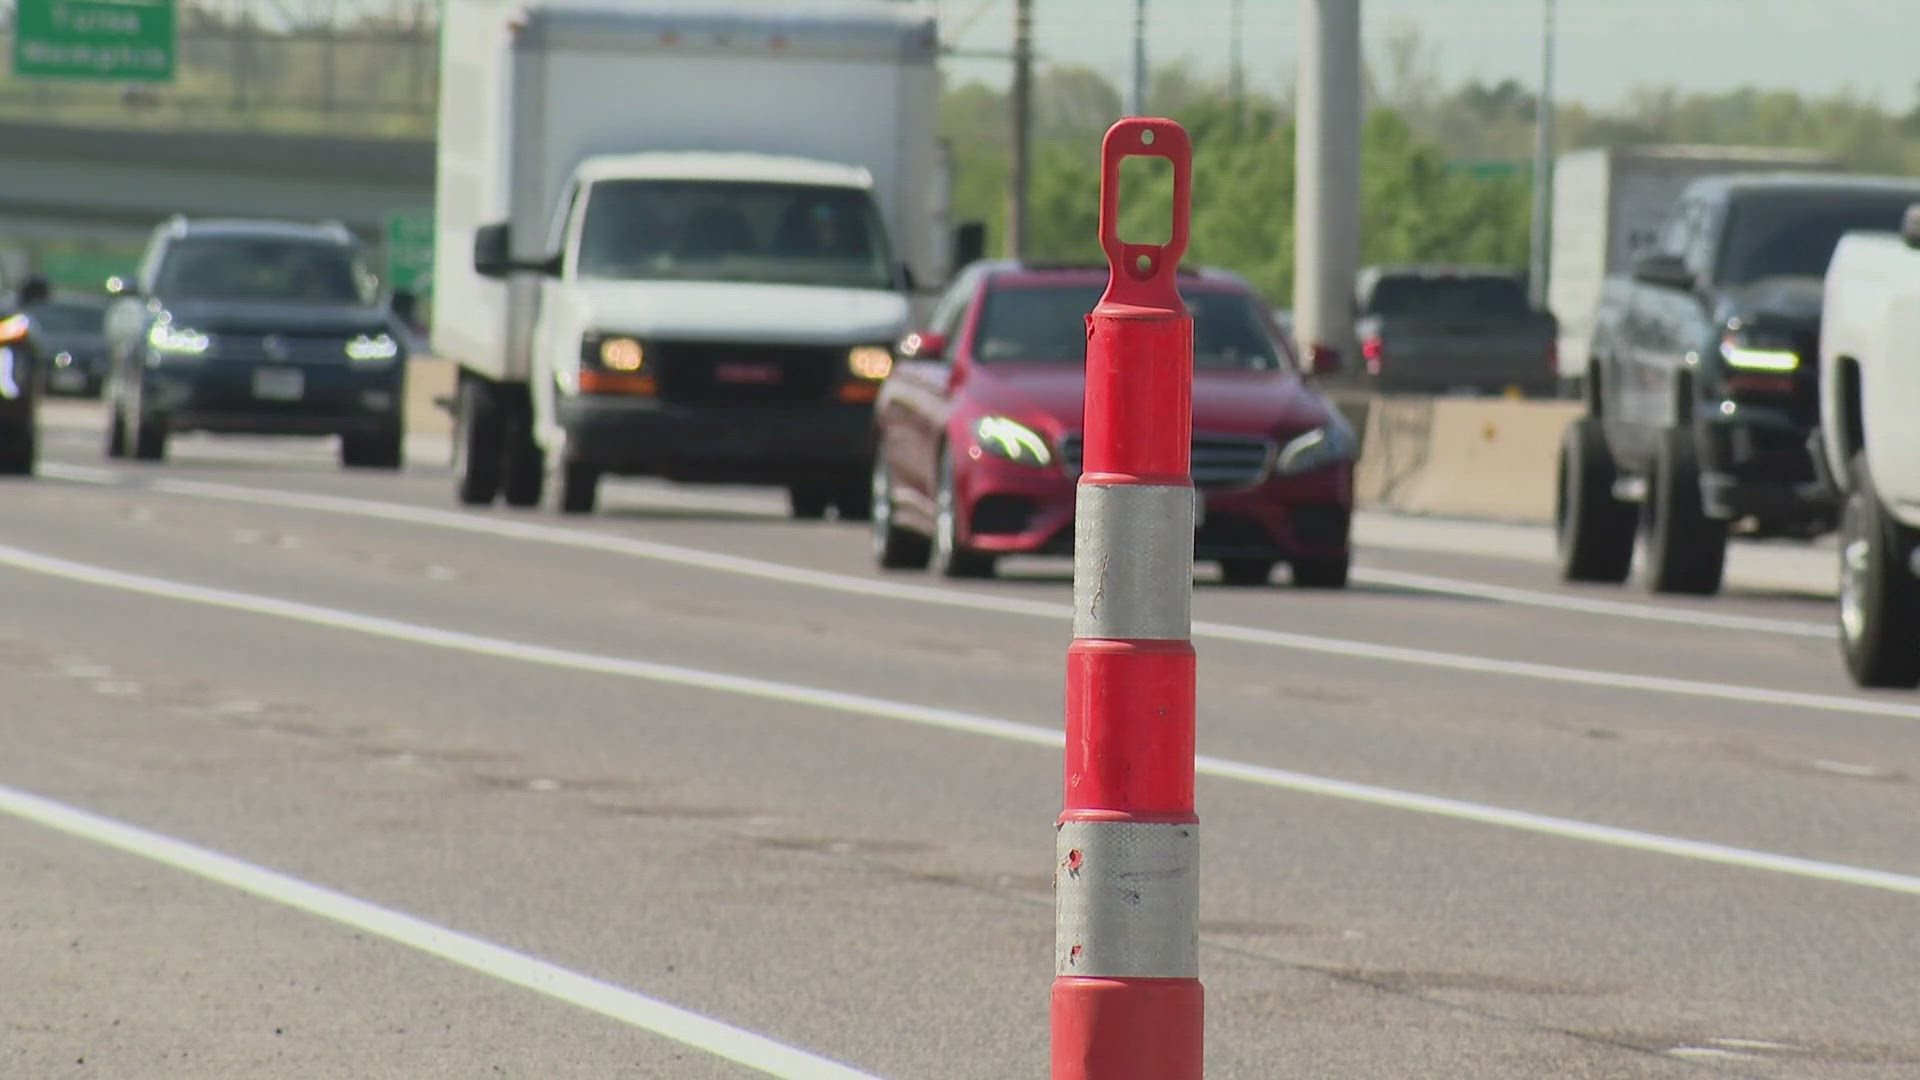 April is Distracted Driving Awareness Month. MoDOT and IDOT are asking drivers to put their phones down and keep their eyes on the road in work zones.